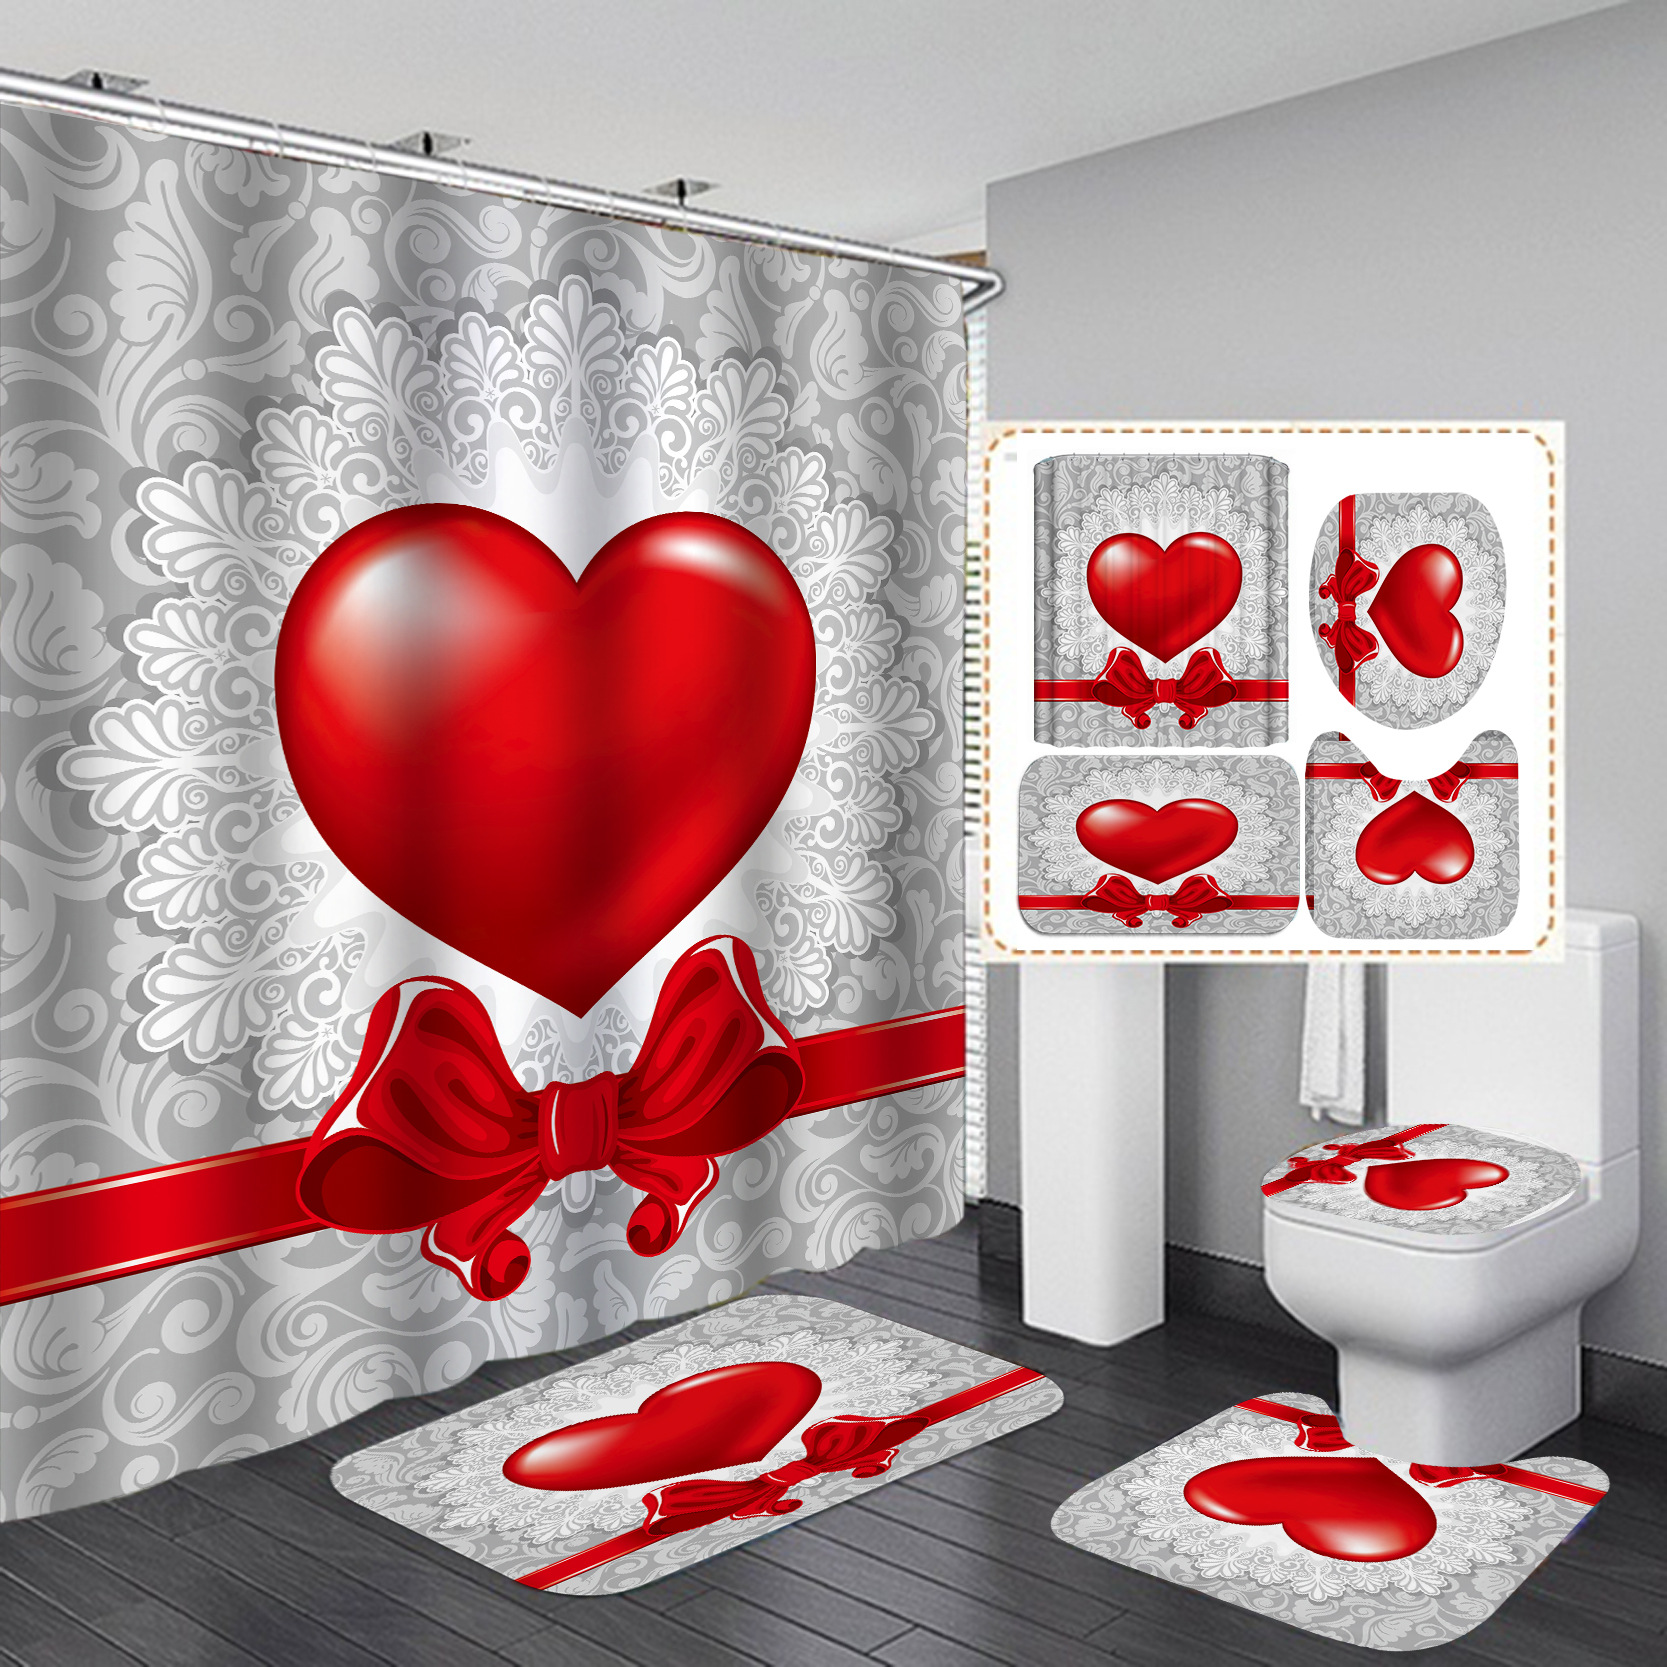 2020 Romantic Printed Waterproof Shower Curtain Love Heart Bathroom Curtain Valentine Lover Curtains for Shower Room